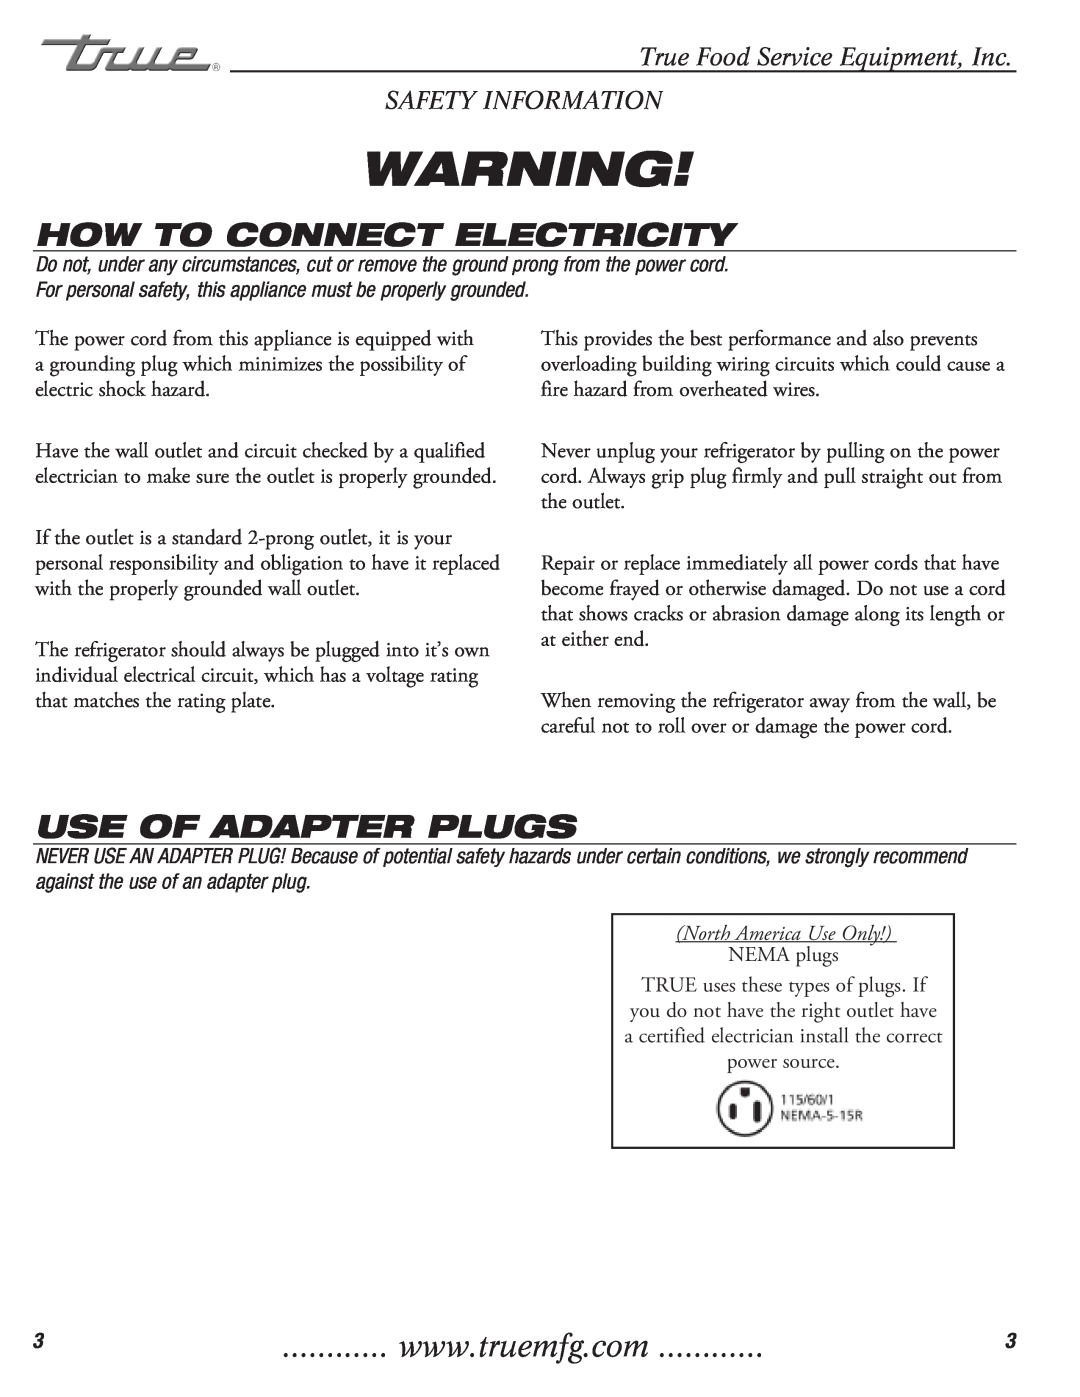 True Manufacturing Company TFP-32-12M-D-2 How To Connect Electricity, Use Of Adapter Plugs, North America Use Only 